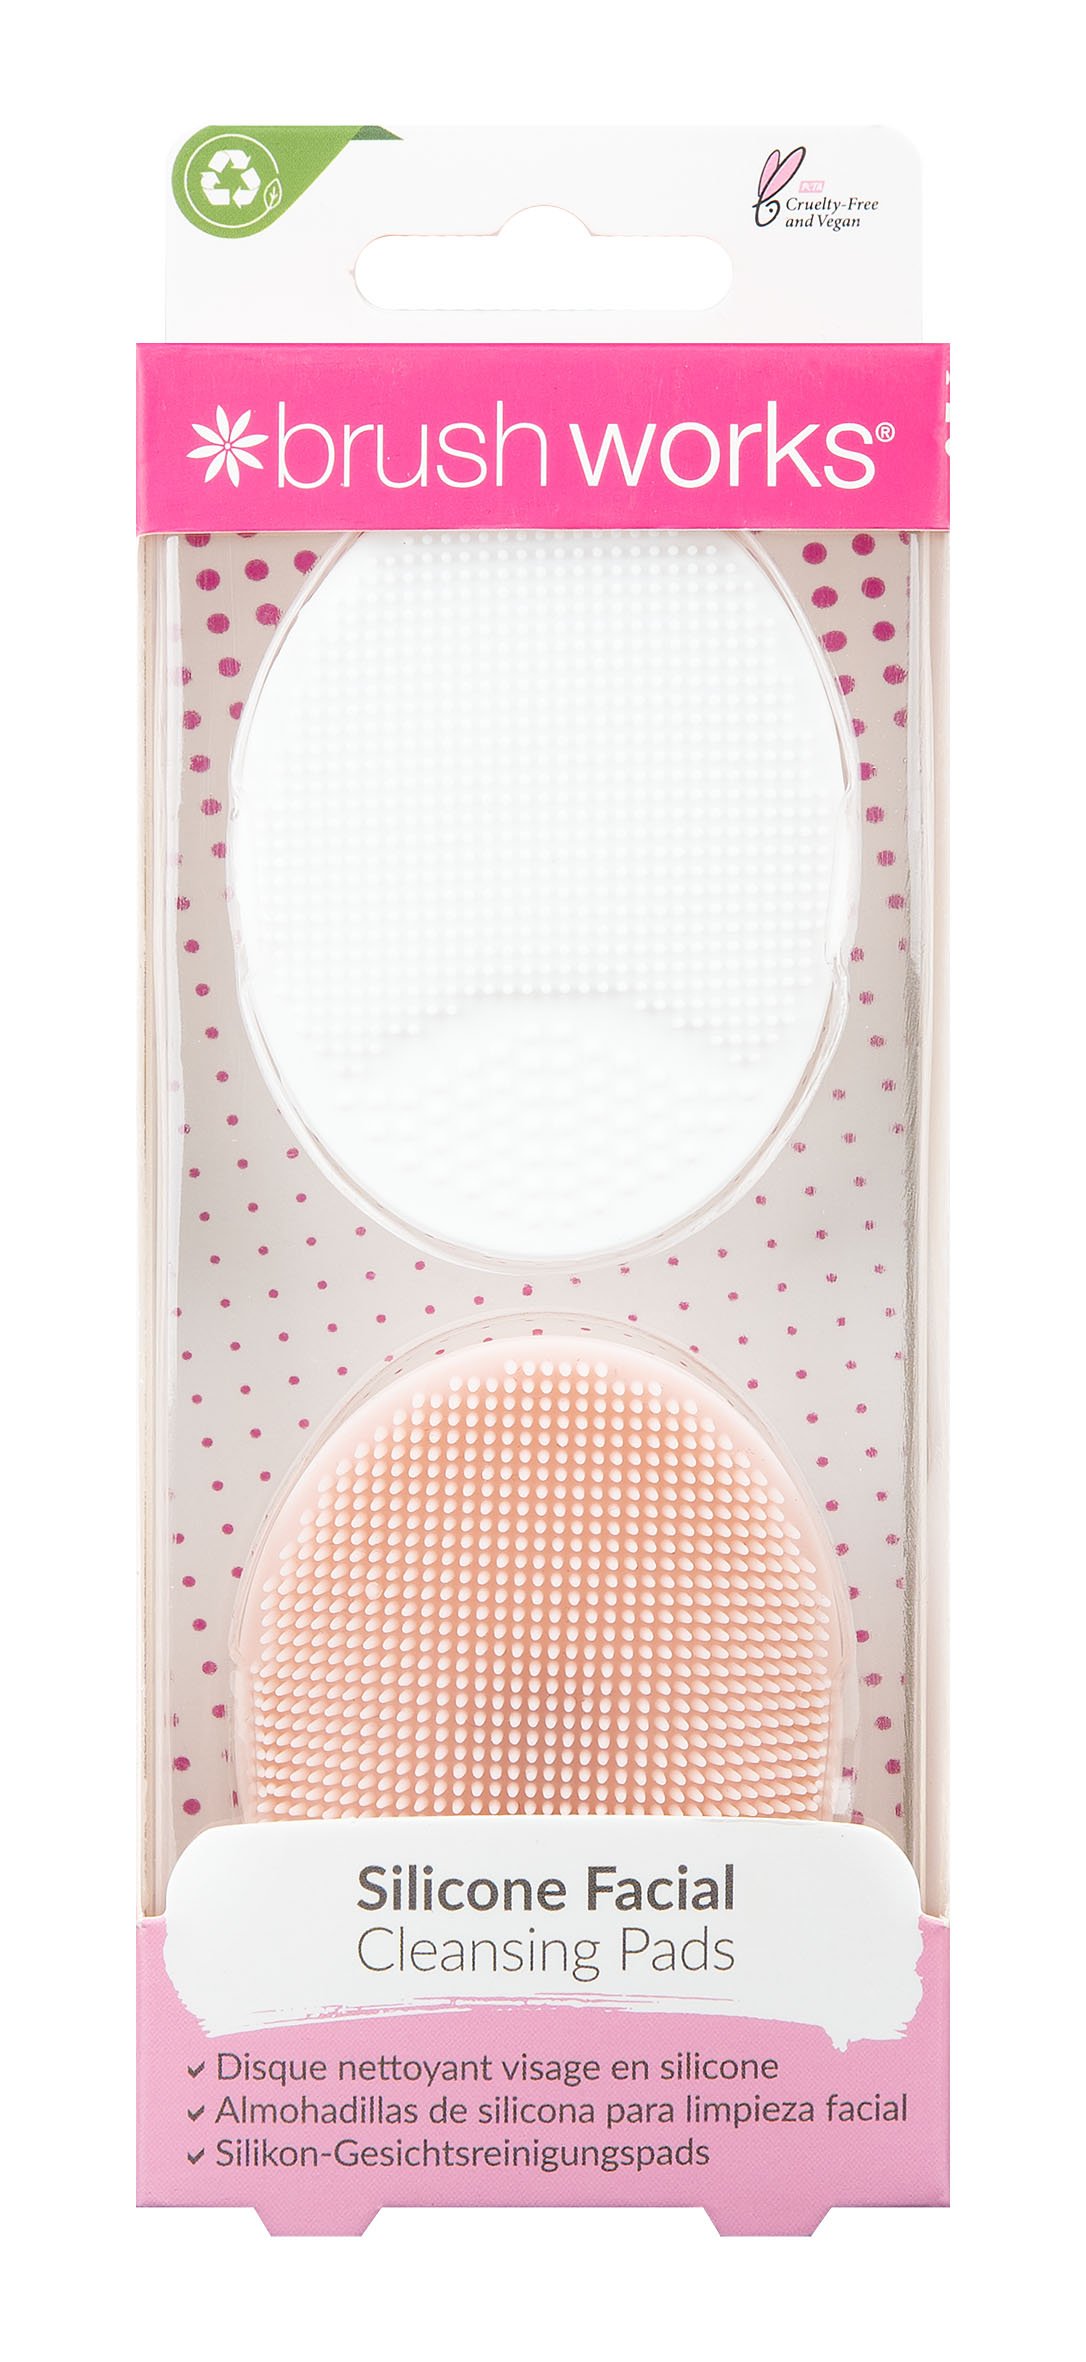 Brushworks Silicone Facial Cleansing Pads, 2 stk.